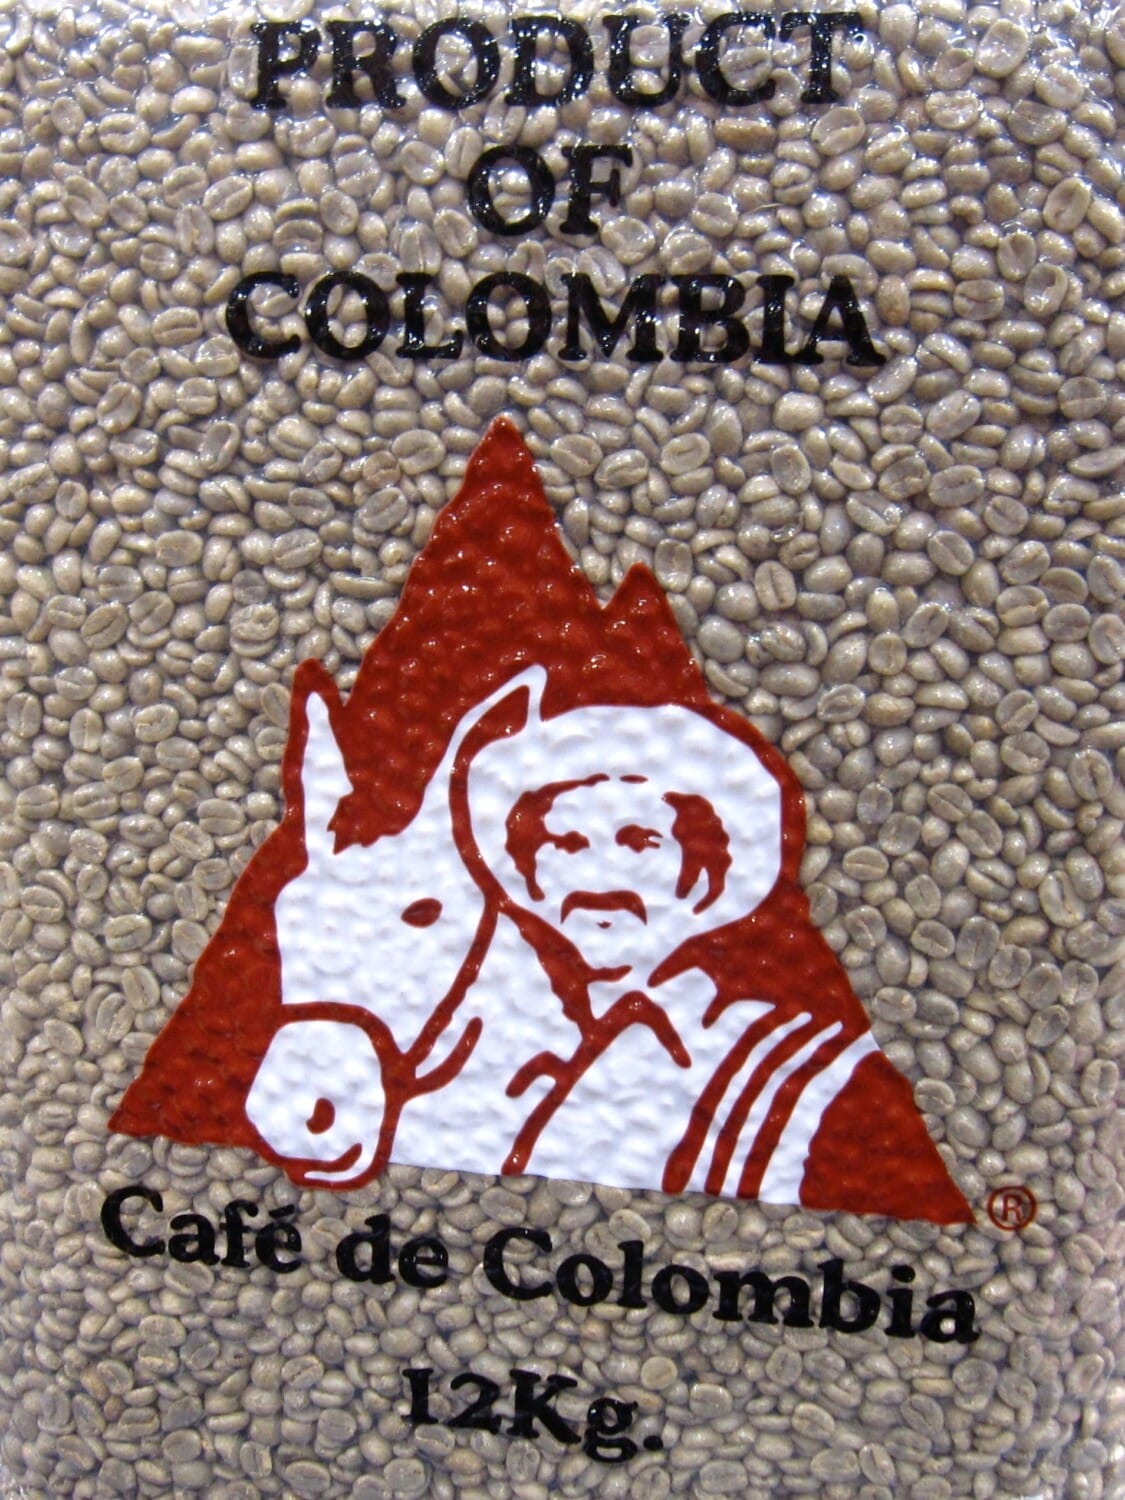 Coffee Colombia